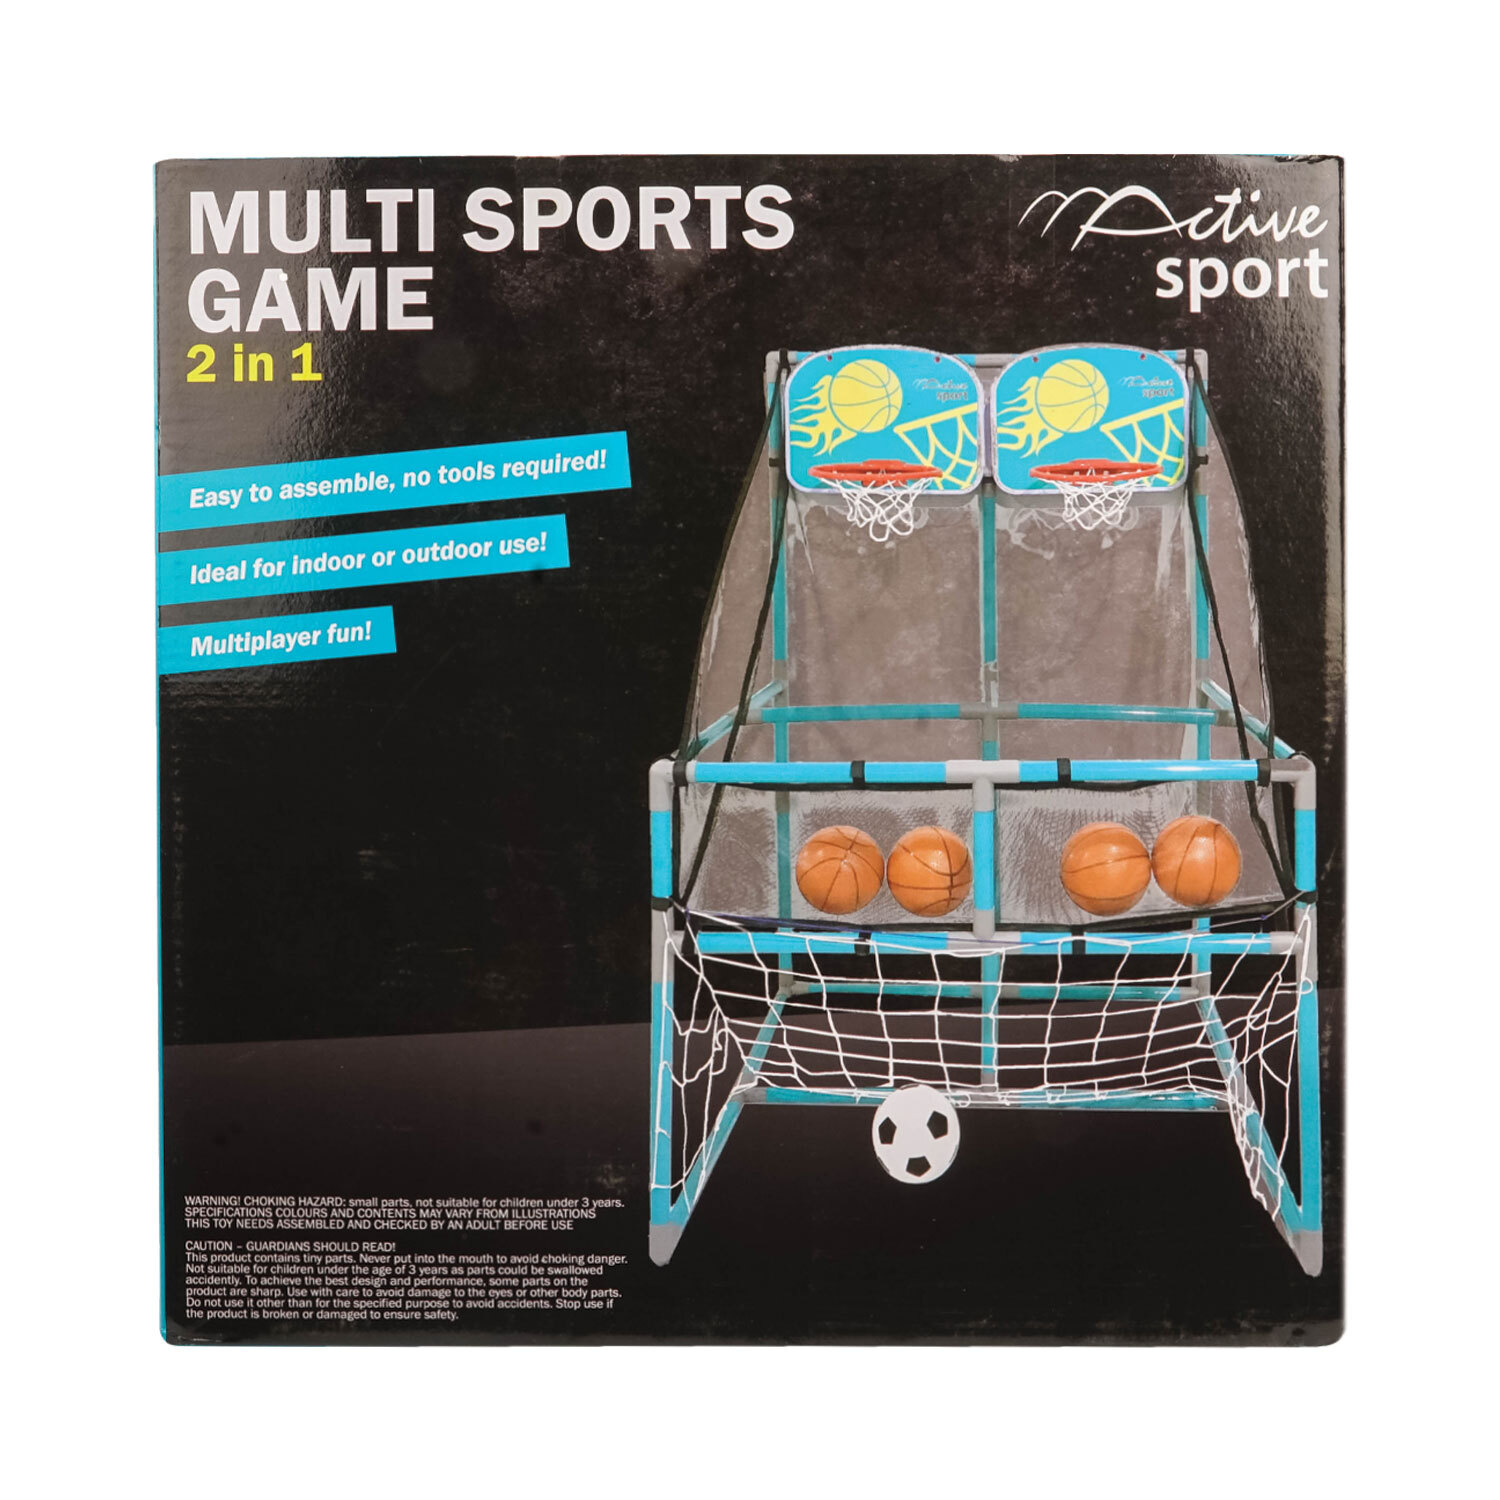 Active Sport 2 in 1 Multi Sports Game Image